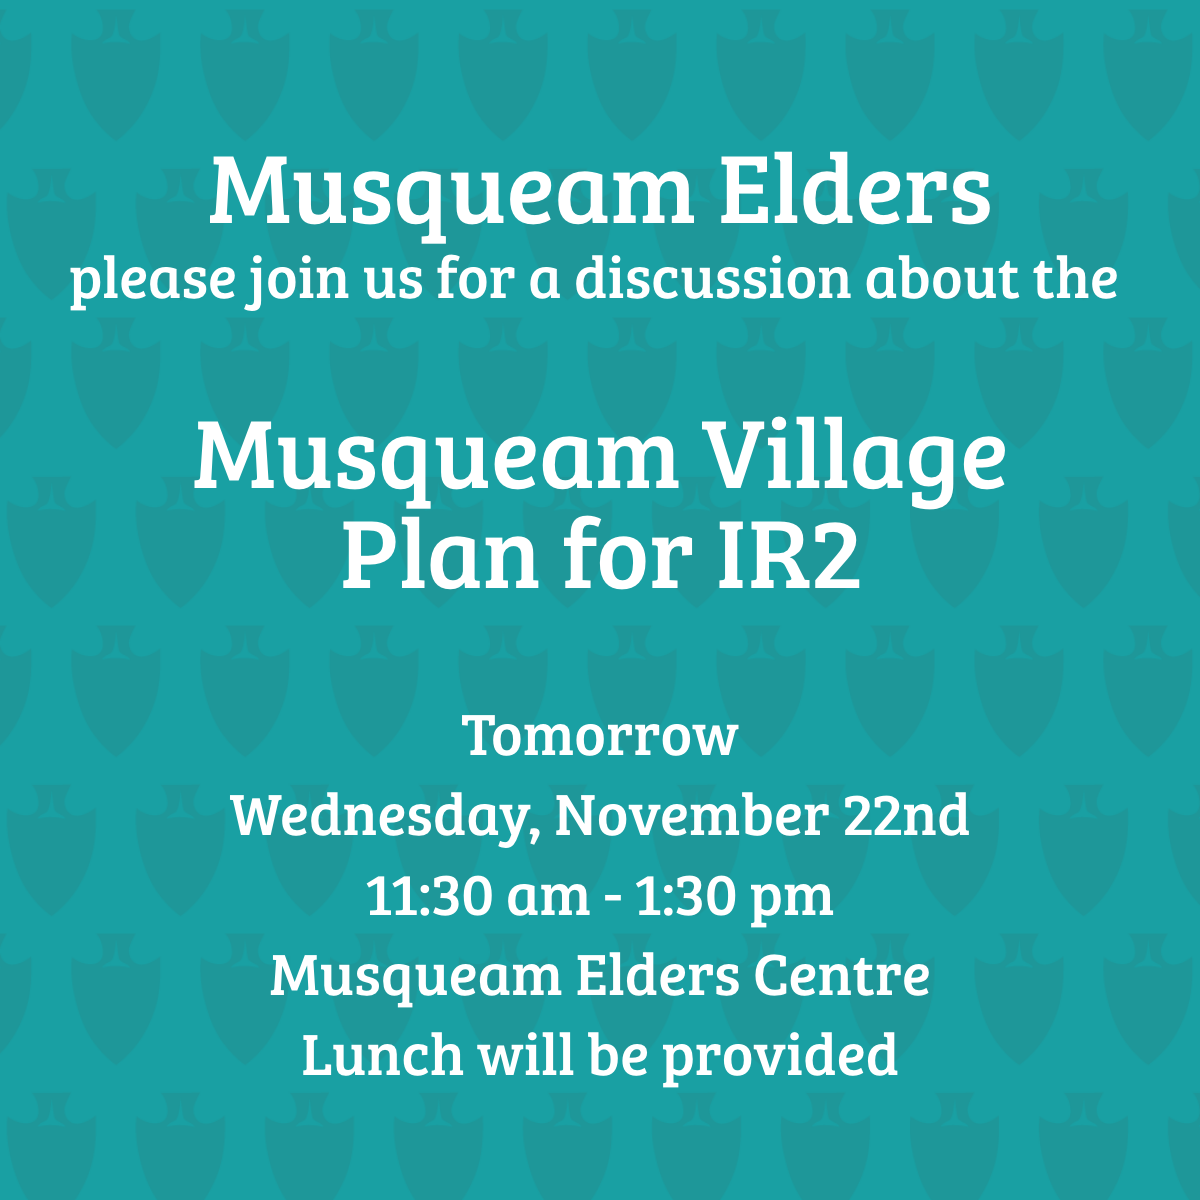 Musqueam Elders, please join us tomorrow, Wednesday, November 22nd, at the Elders Centre from 11:30 am - 1:30 pm for a discussion about the Musqueam Village Plan for IR2. Lunch provided with vegetarian options. 